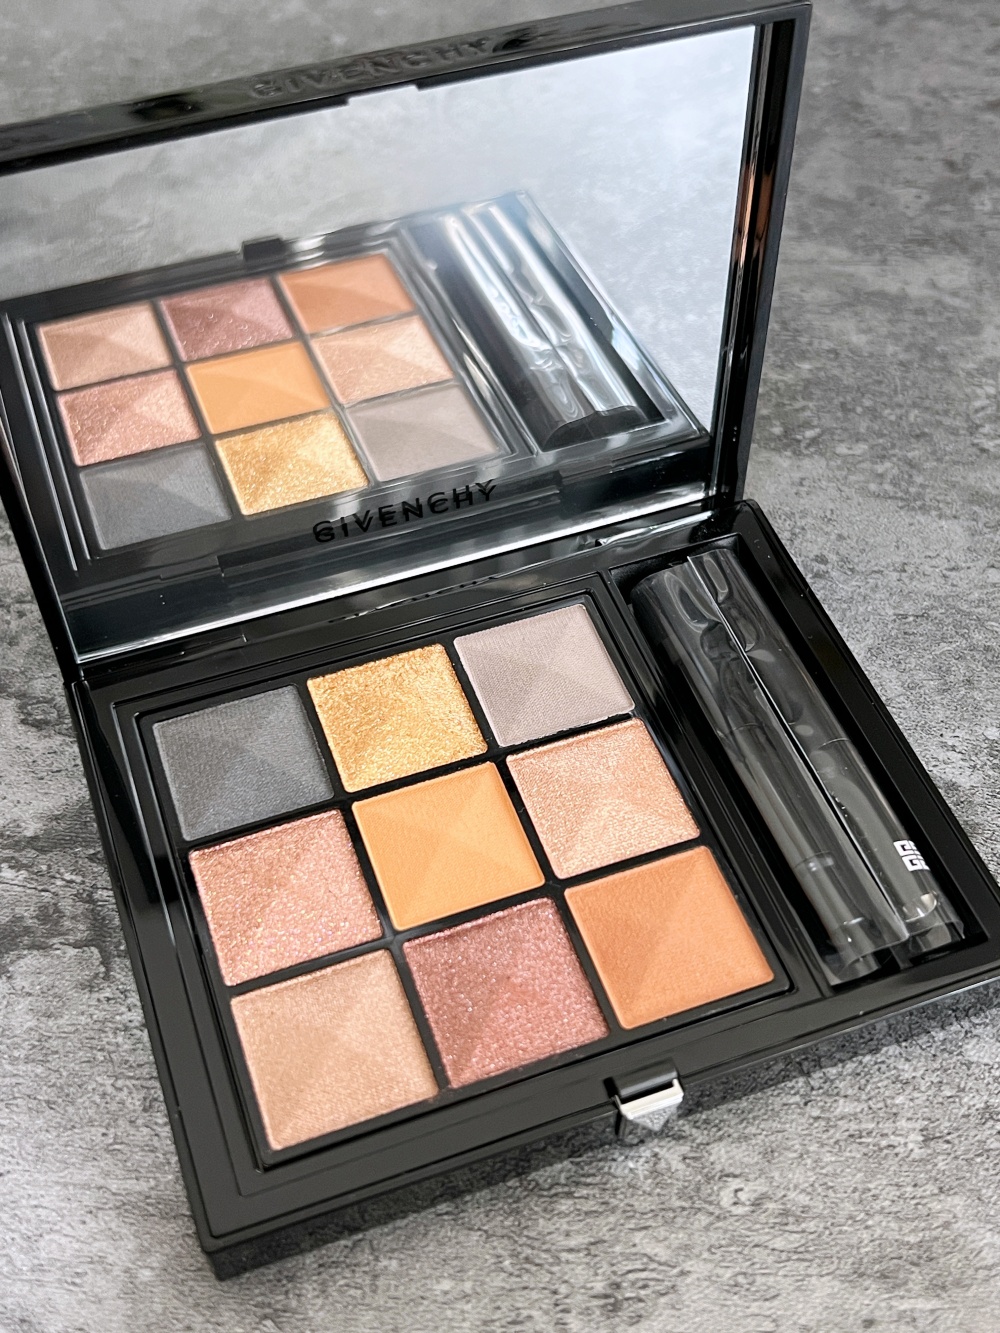 Swatches: Givenchy Le 9 de Givenchy Palette